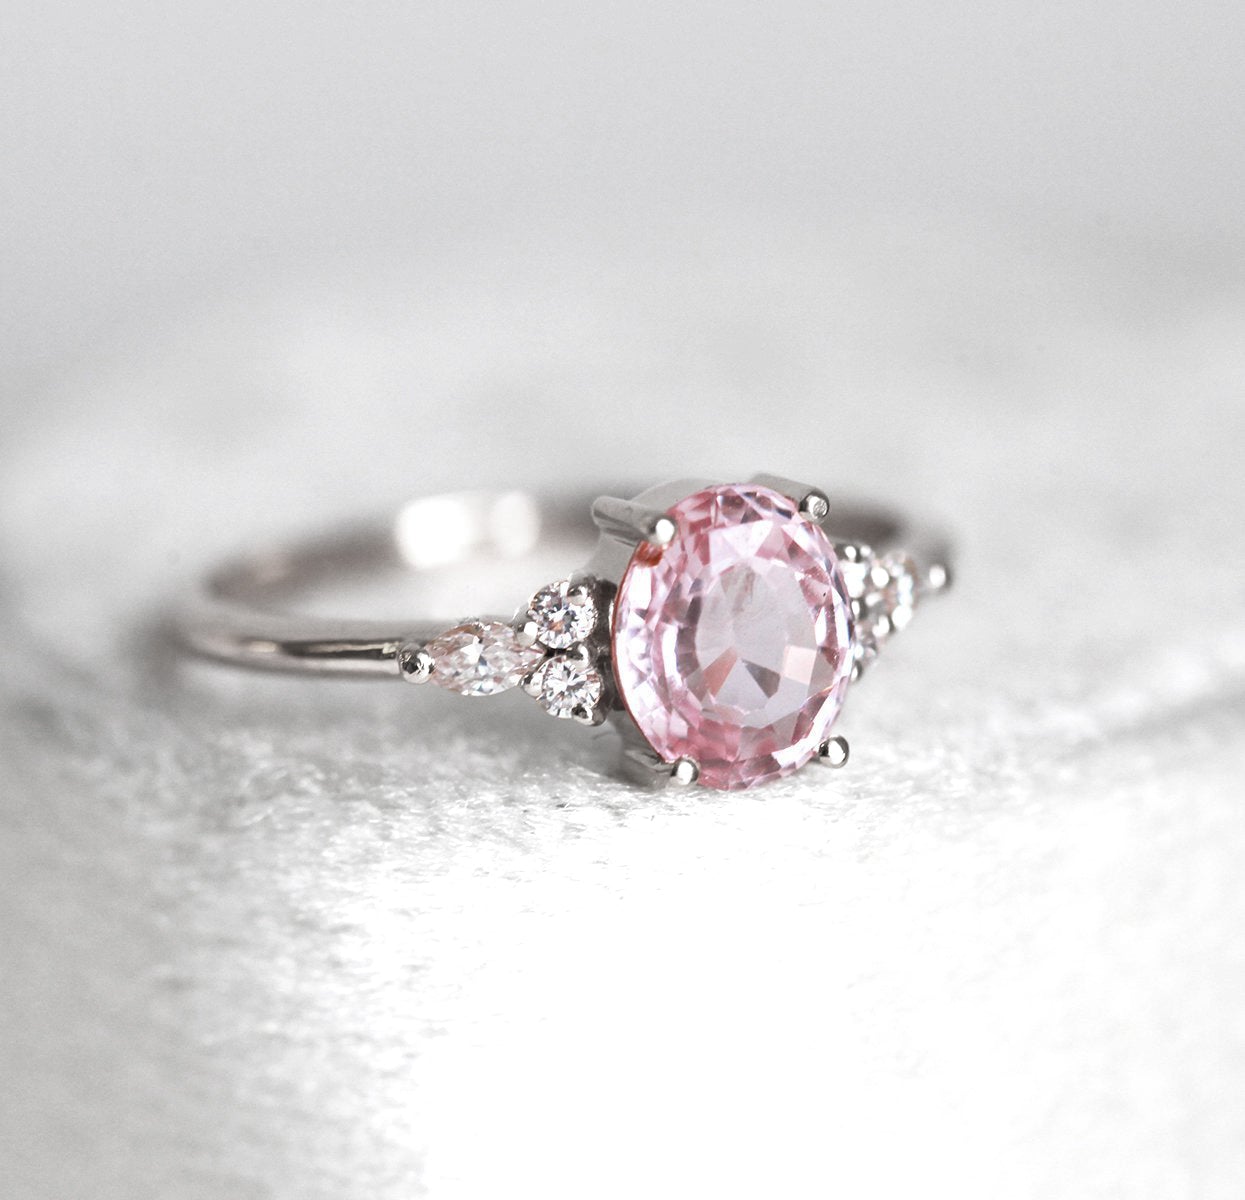 Oval peach pink sapphire with white side diamonds